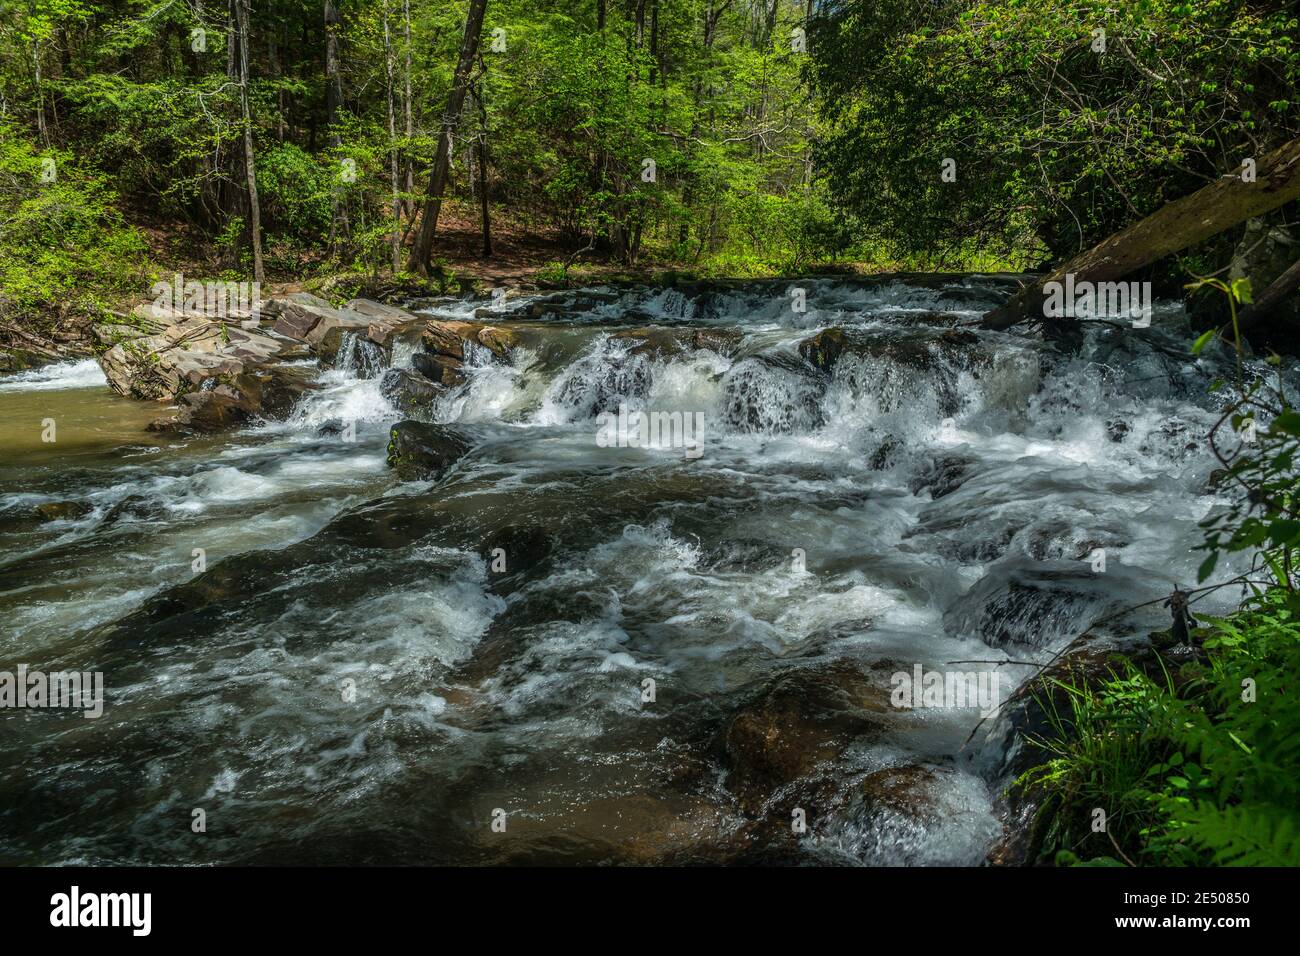 Rushing whitewater rapids flowing fast through the rocks and boulders downstream in the forest on a sunny day in springtime Stock Photo